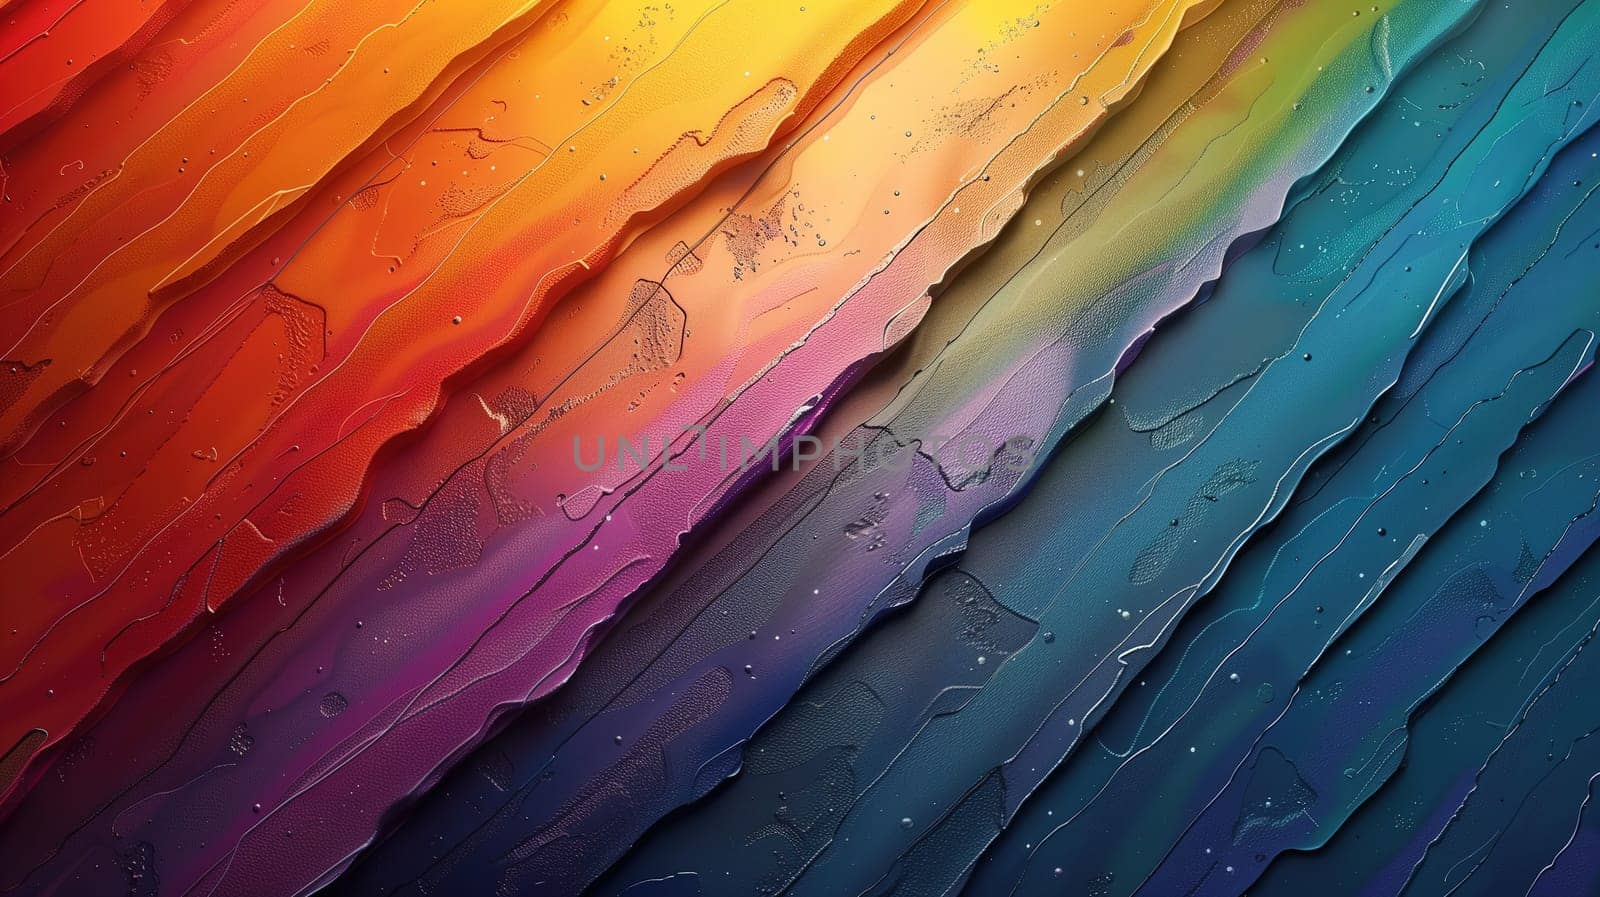 Vibrant Rainbow Colors Illustrating LGBT Pride on Textured Surface by TRMK